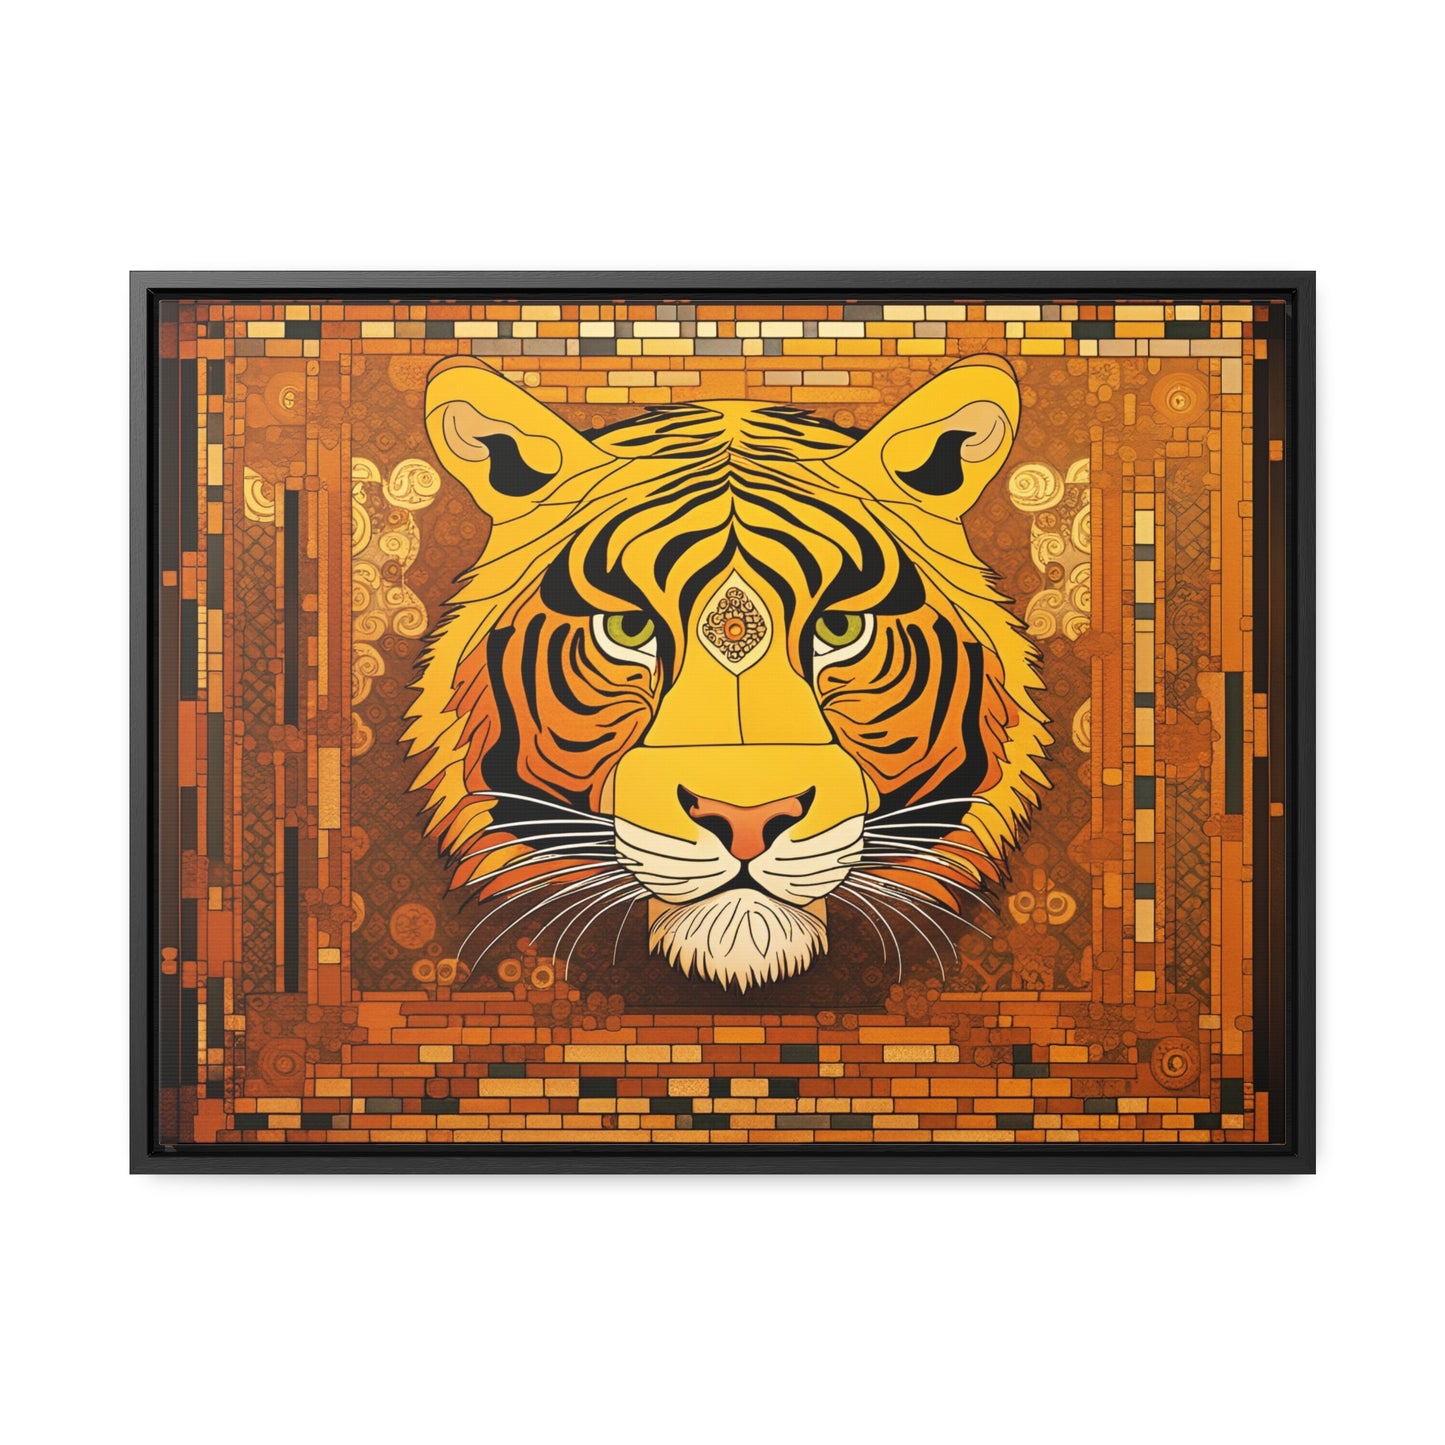 Tiger Head in the Style of Gustav Klimt Print on Canvas in a Floating Frame 24x18